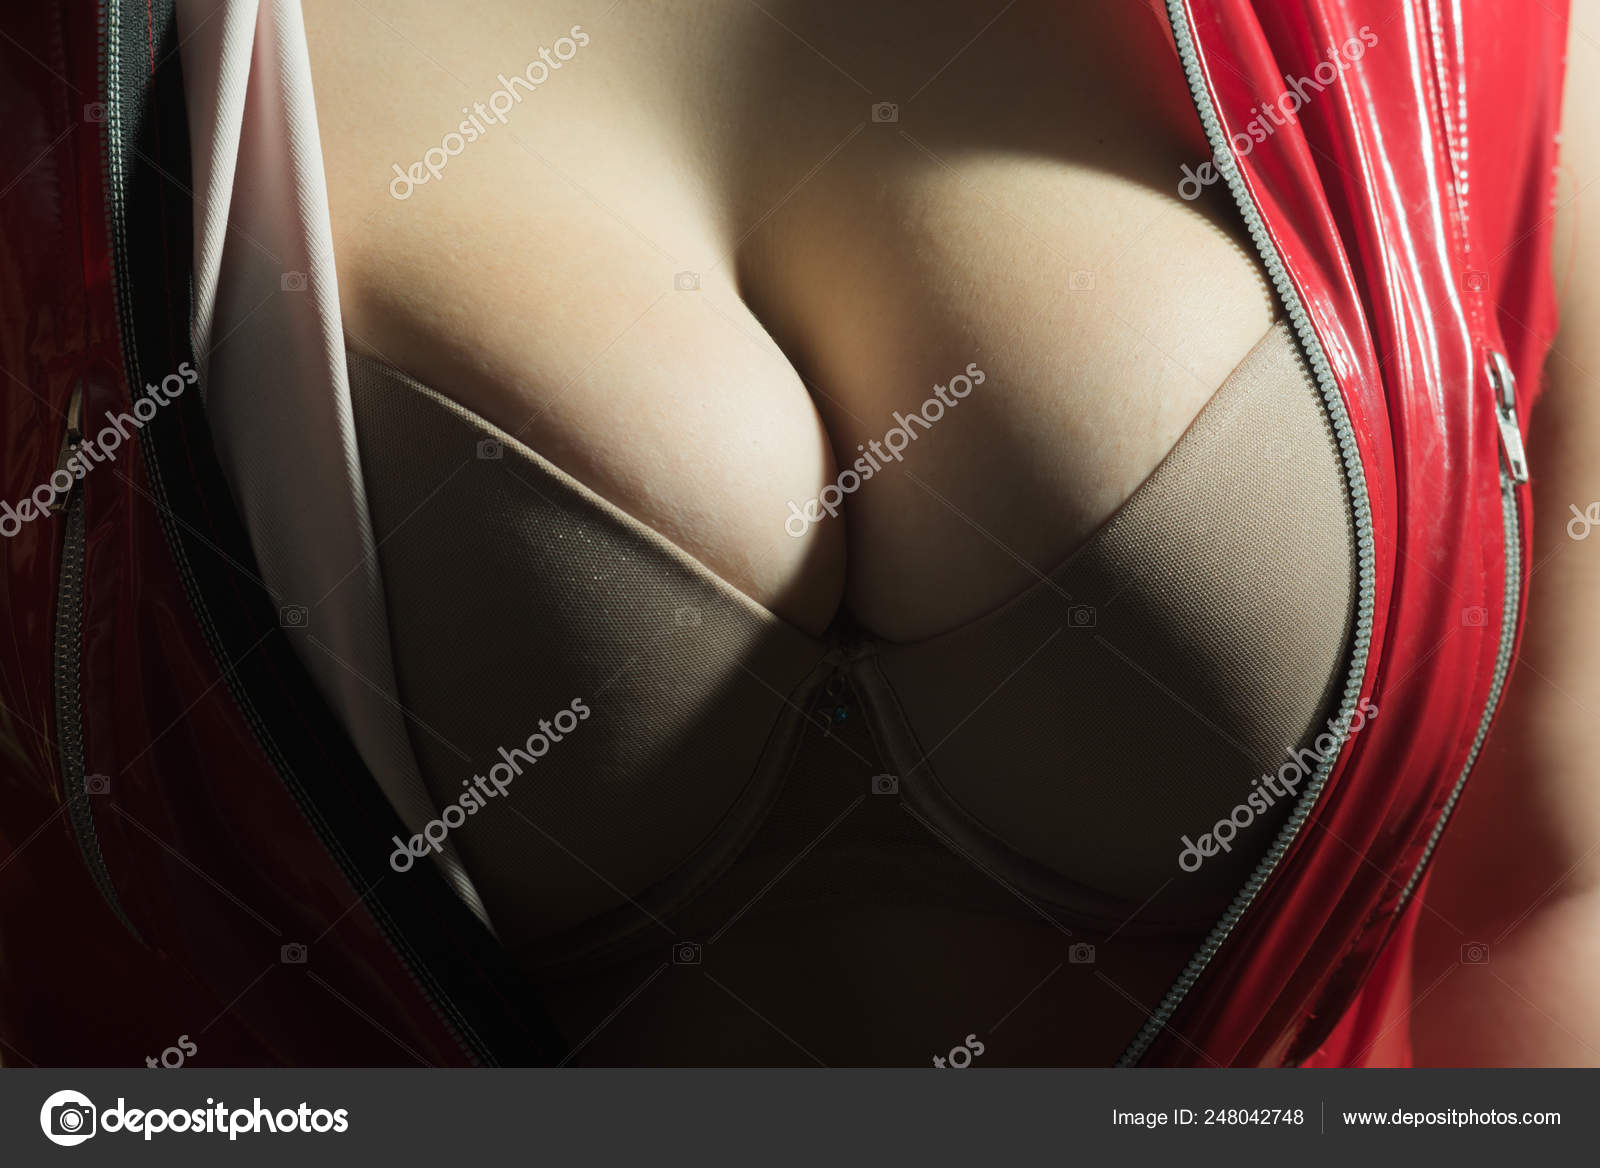 XXL and XL breast size. sexy chest of woman. mammologist. Plastic Surgery.  Woman with big natural sexy boobs. silicone implants. healthcare. Sexy boob.  Breast cancer. Willing to be the first. Stock Photo